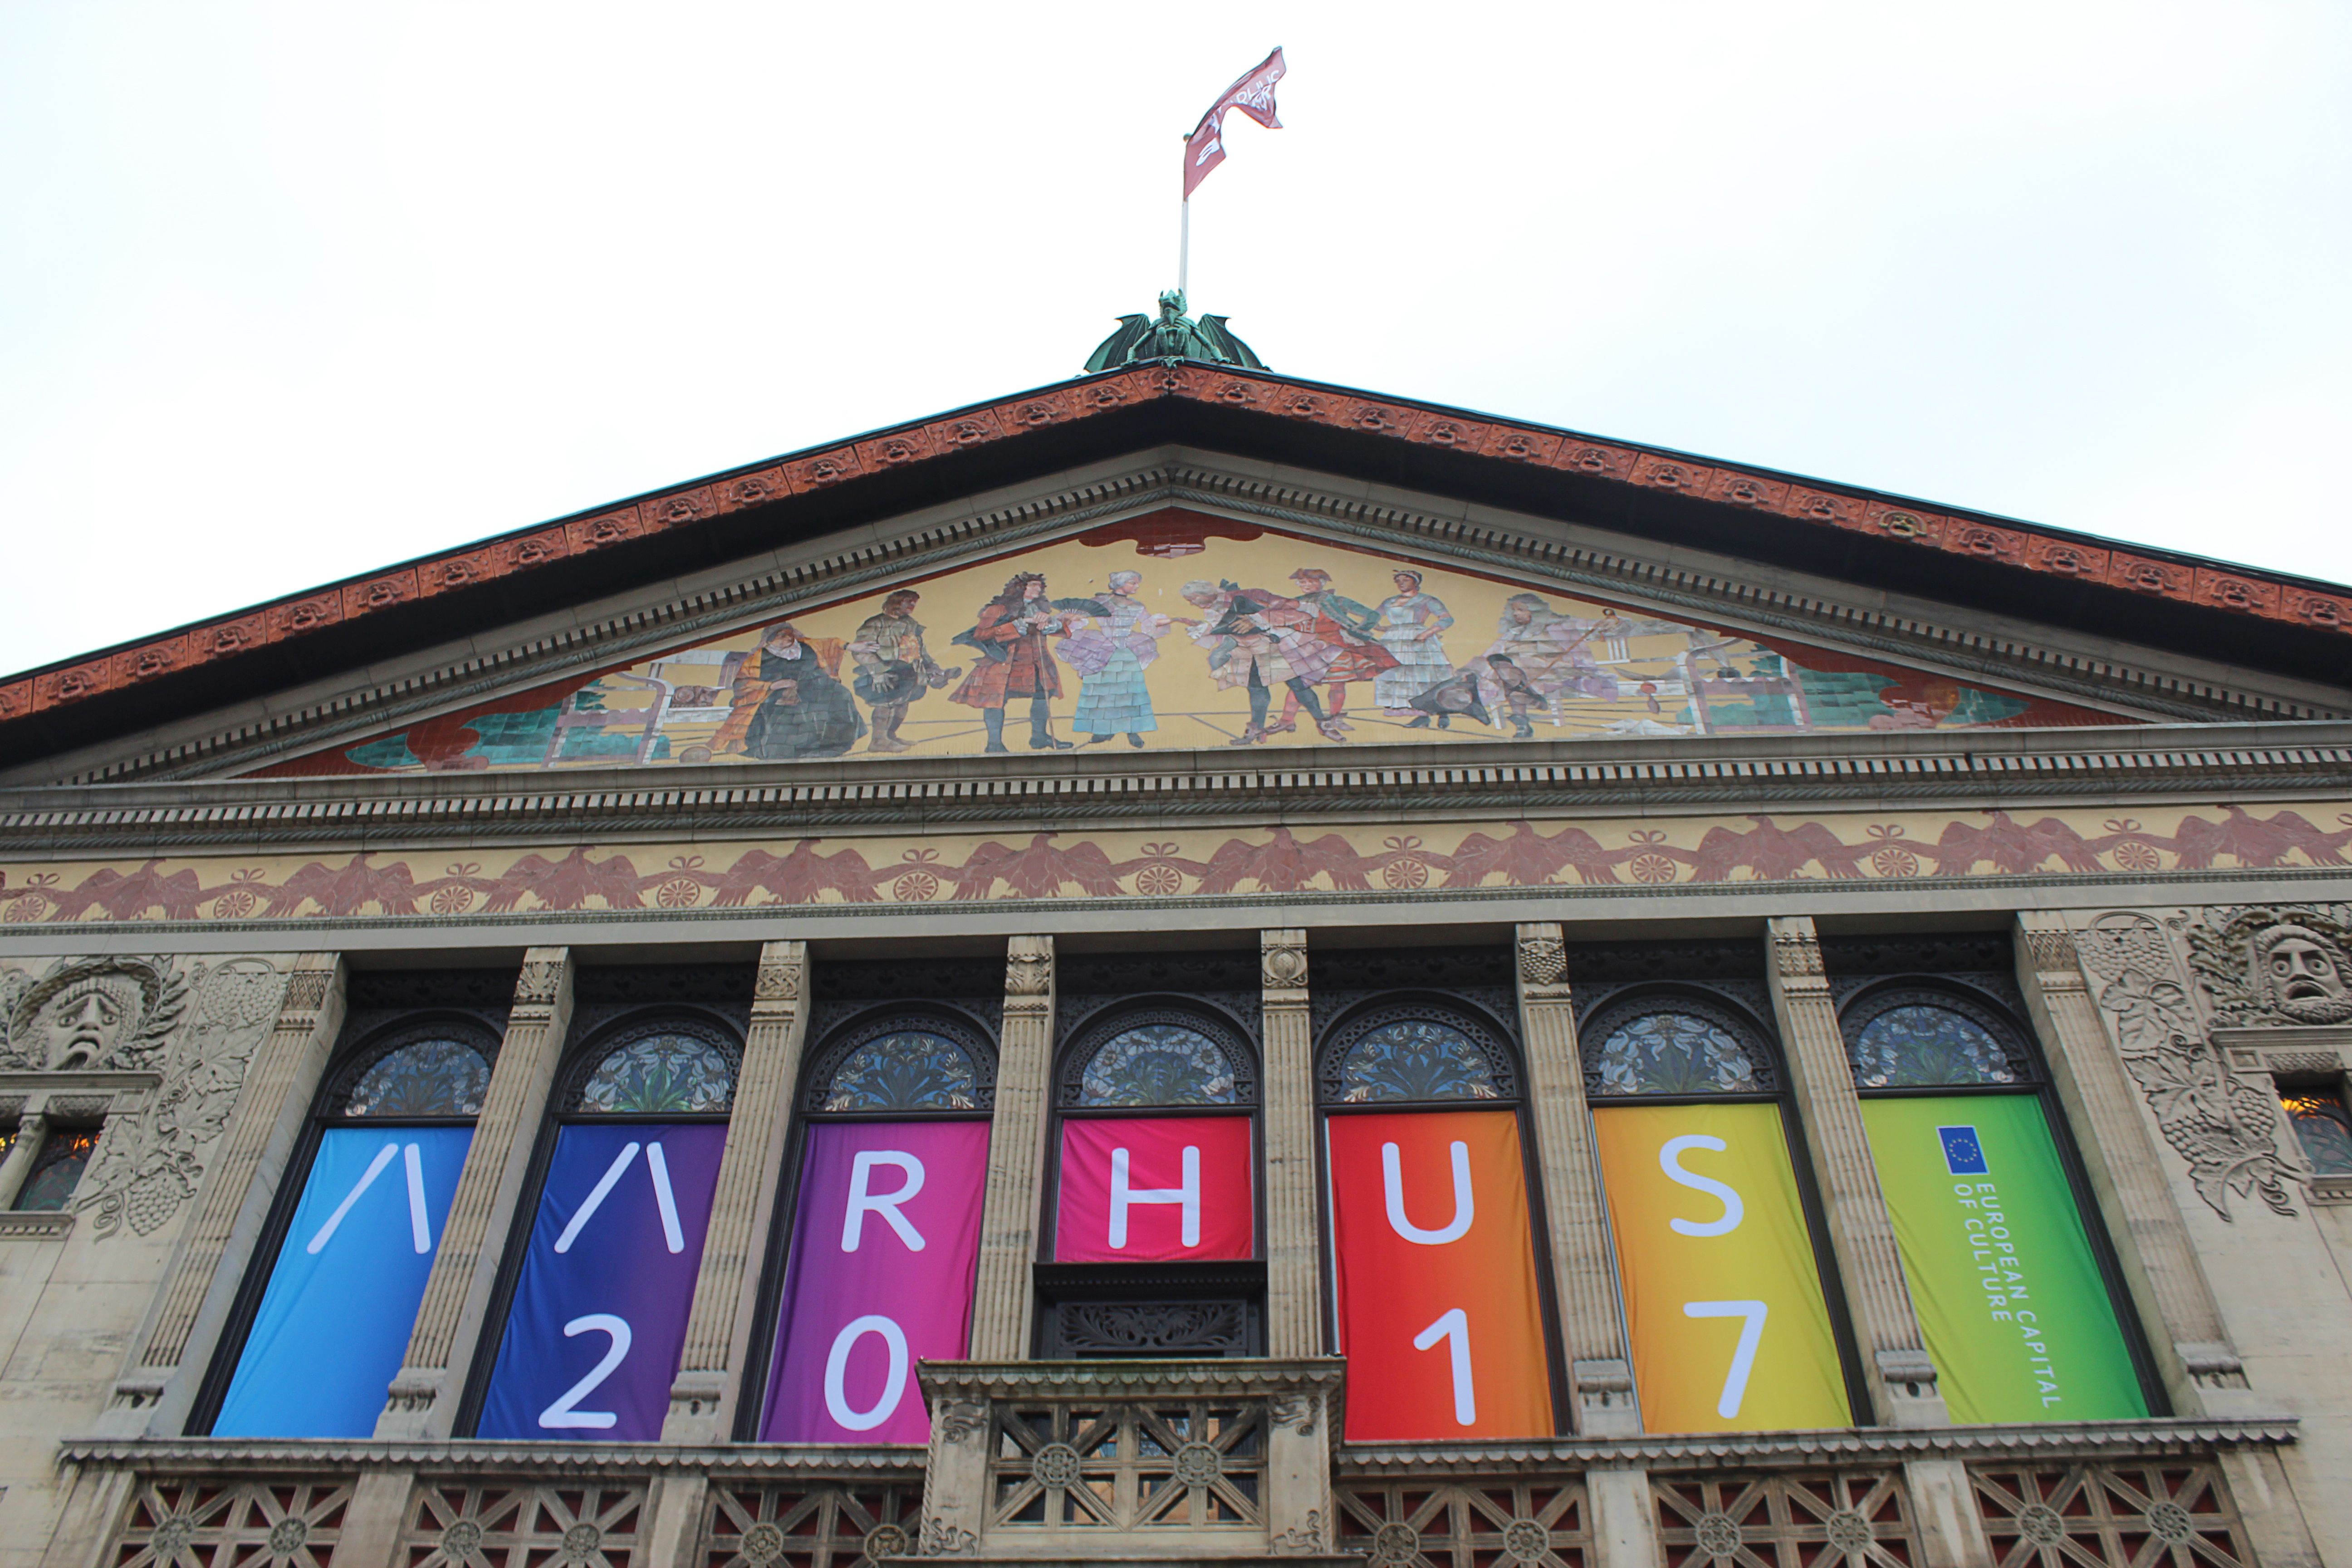 Aarhus to spend next year “rethinking” as the European Capital of Culture